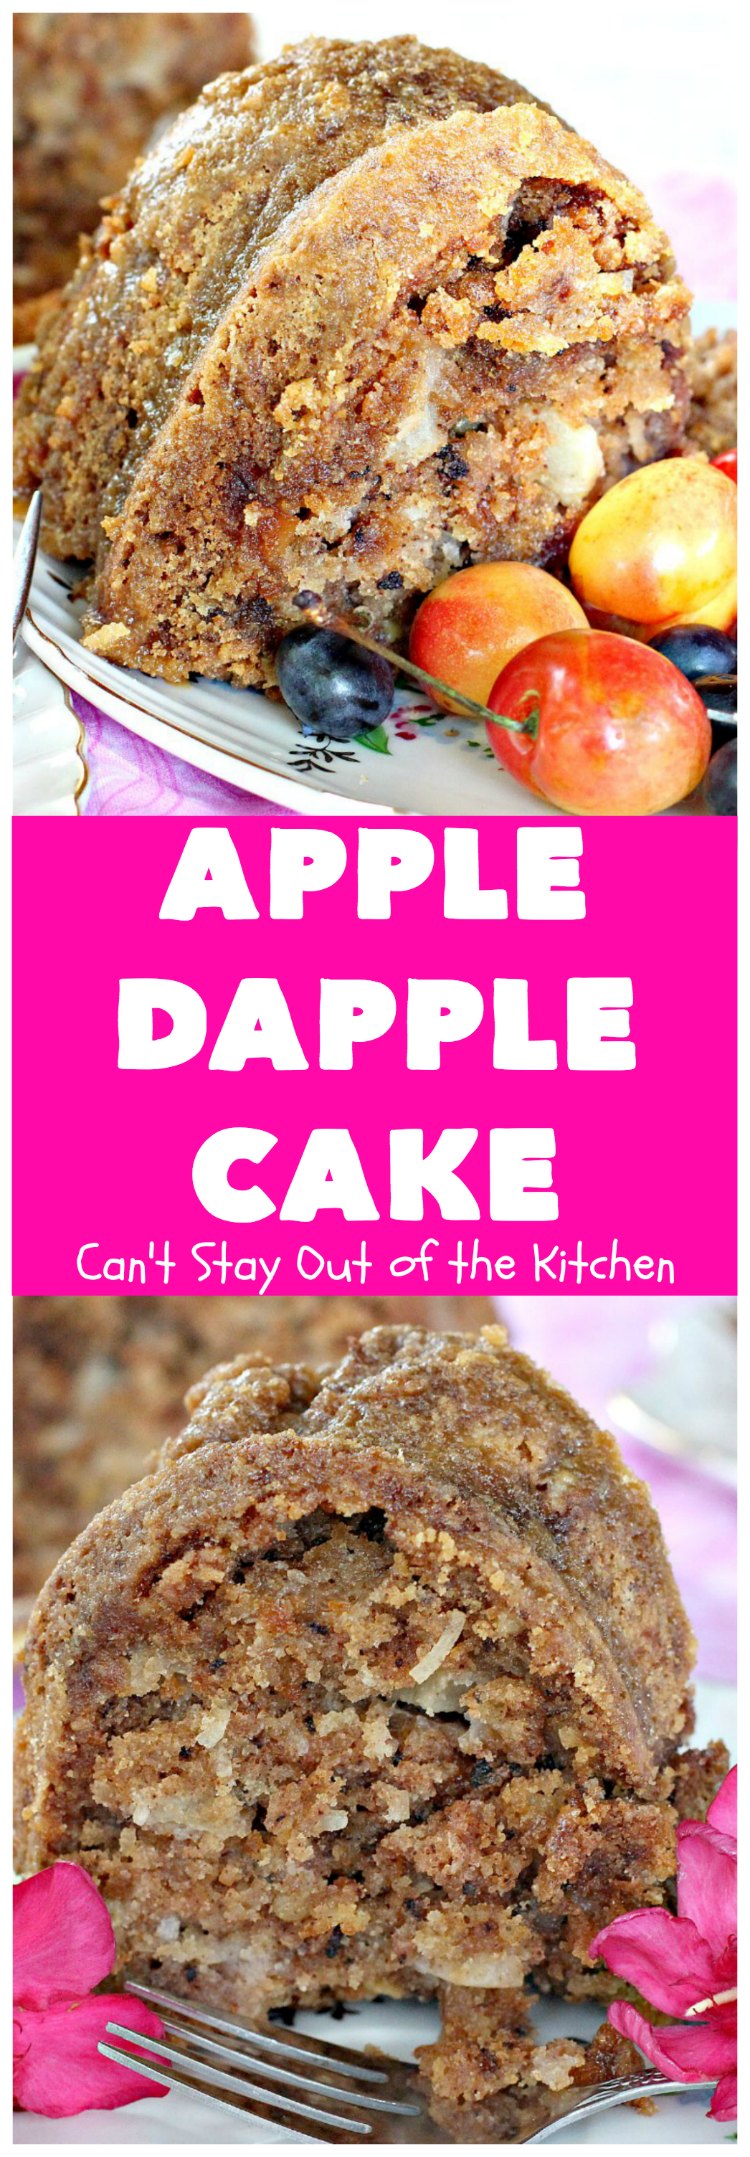 Apple Dapple Cake | Can't Stay Out of the Kitchen | this favorite #apple #cake is filled with #apples, #walnuts & #coconut. It's a terrific #dessert cake or can be used as a #breakfast #coffeecake. #applecake